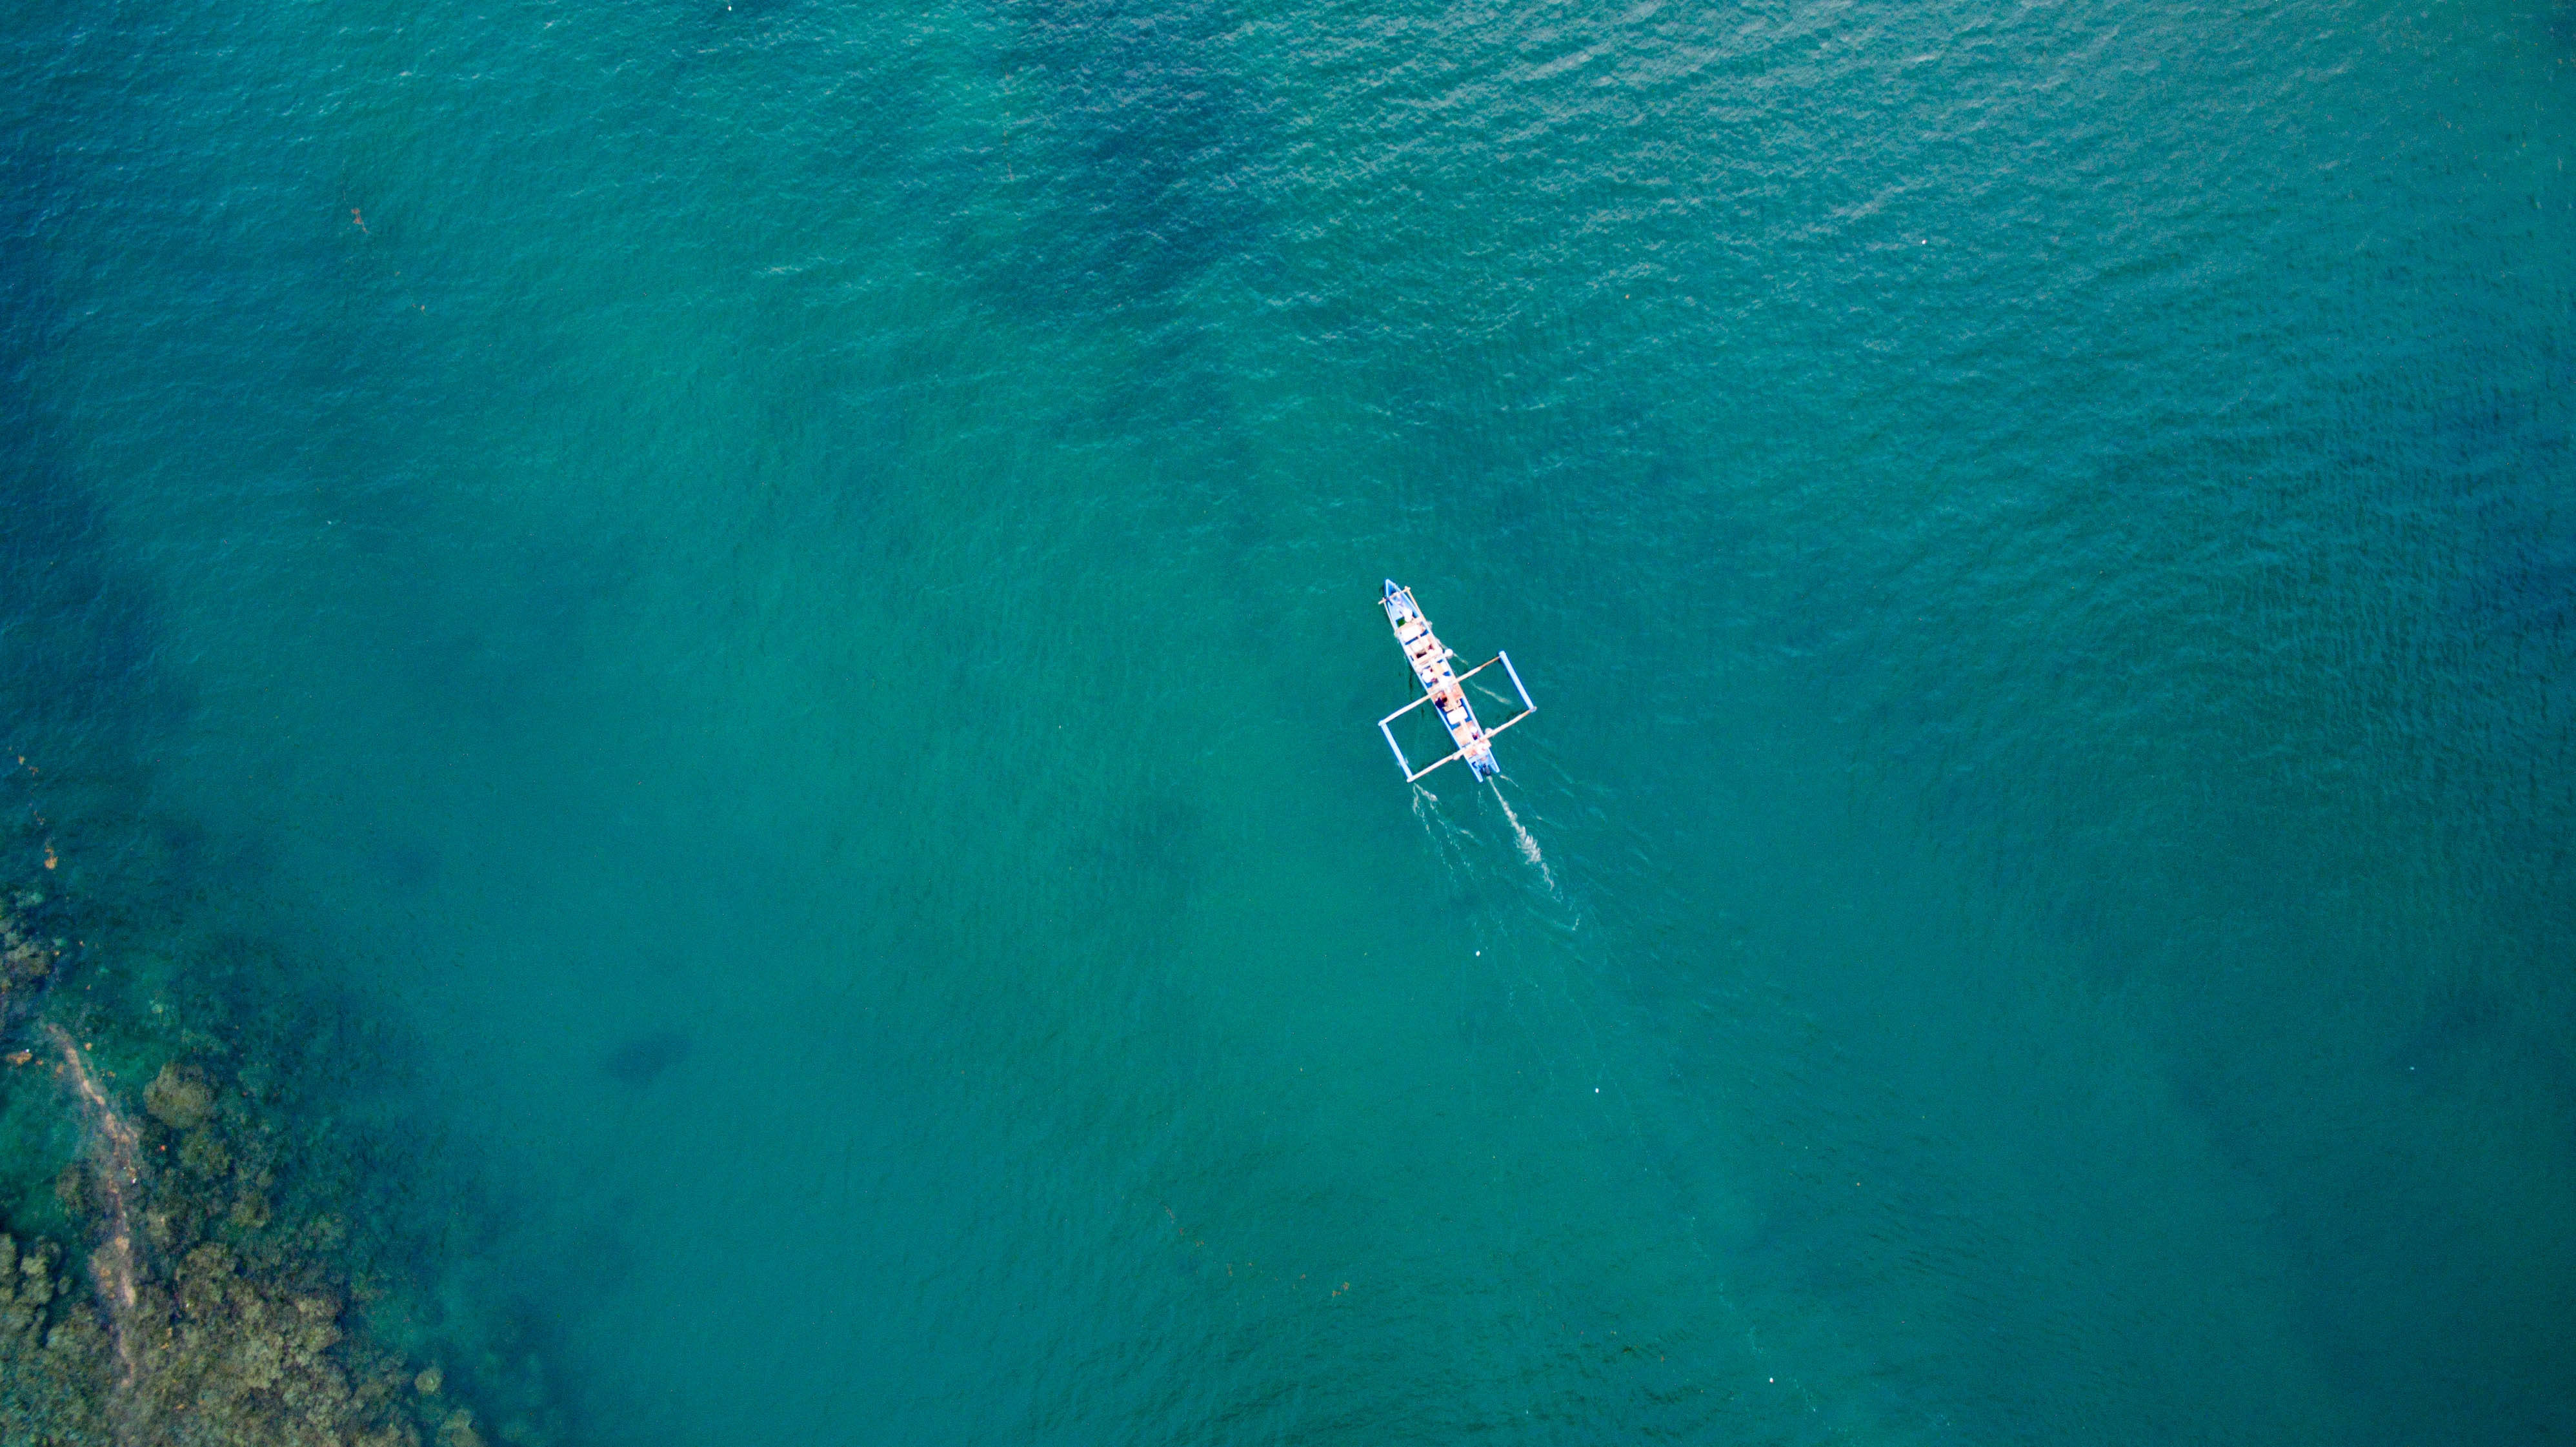 White Boat on Green Body of Water during Daytime, Beach, Bird's eye view, Boat, Coast, HQ Photo